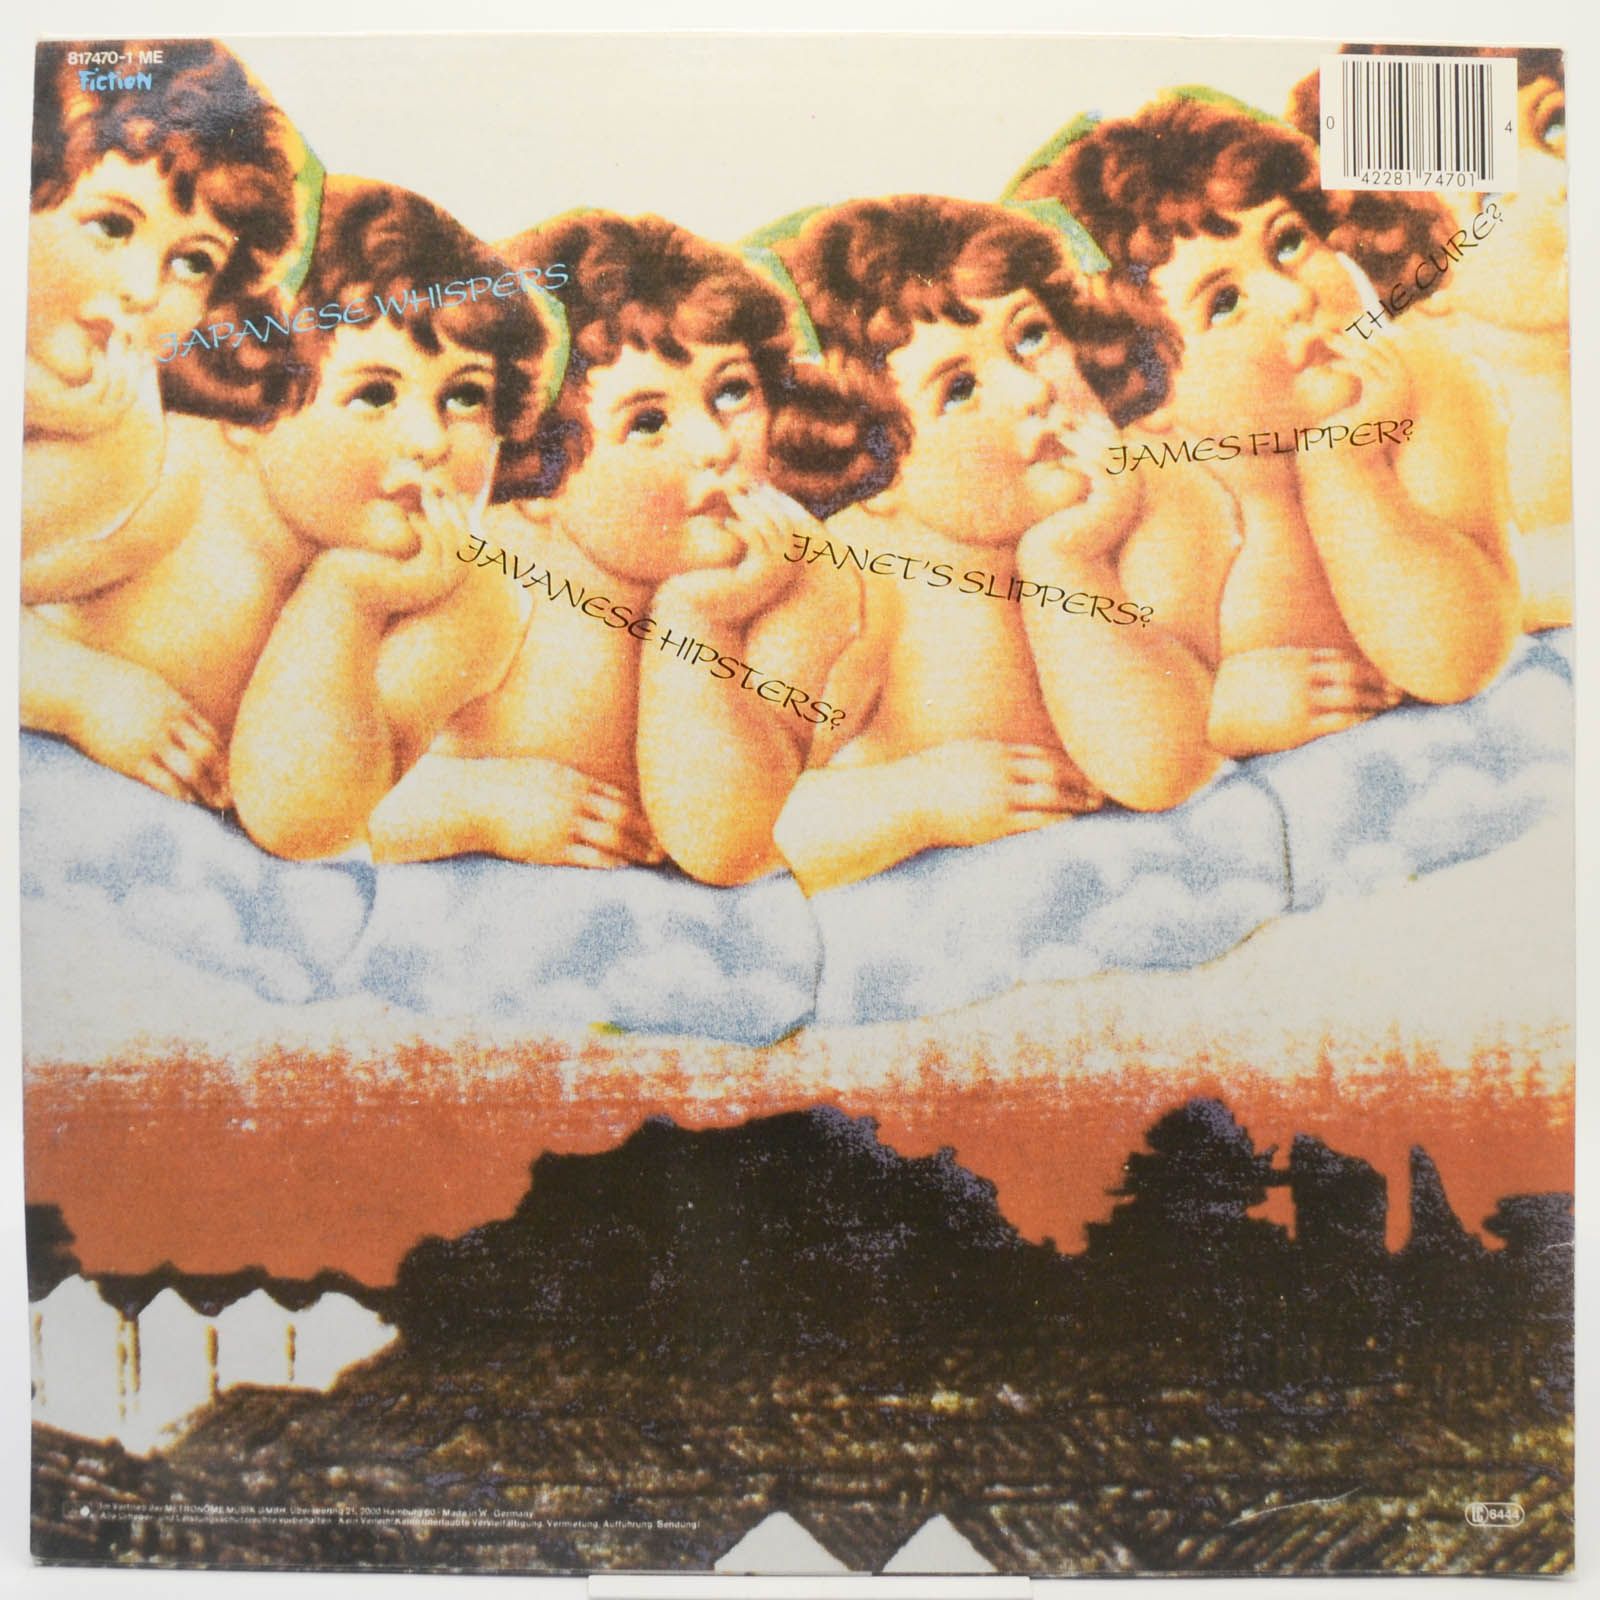 Cure — Japanese Whispers, 1983